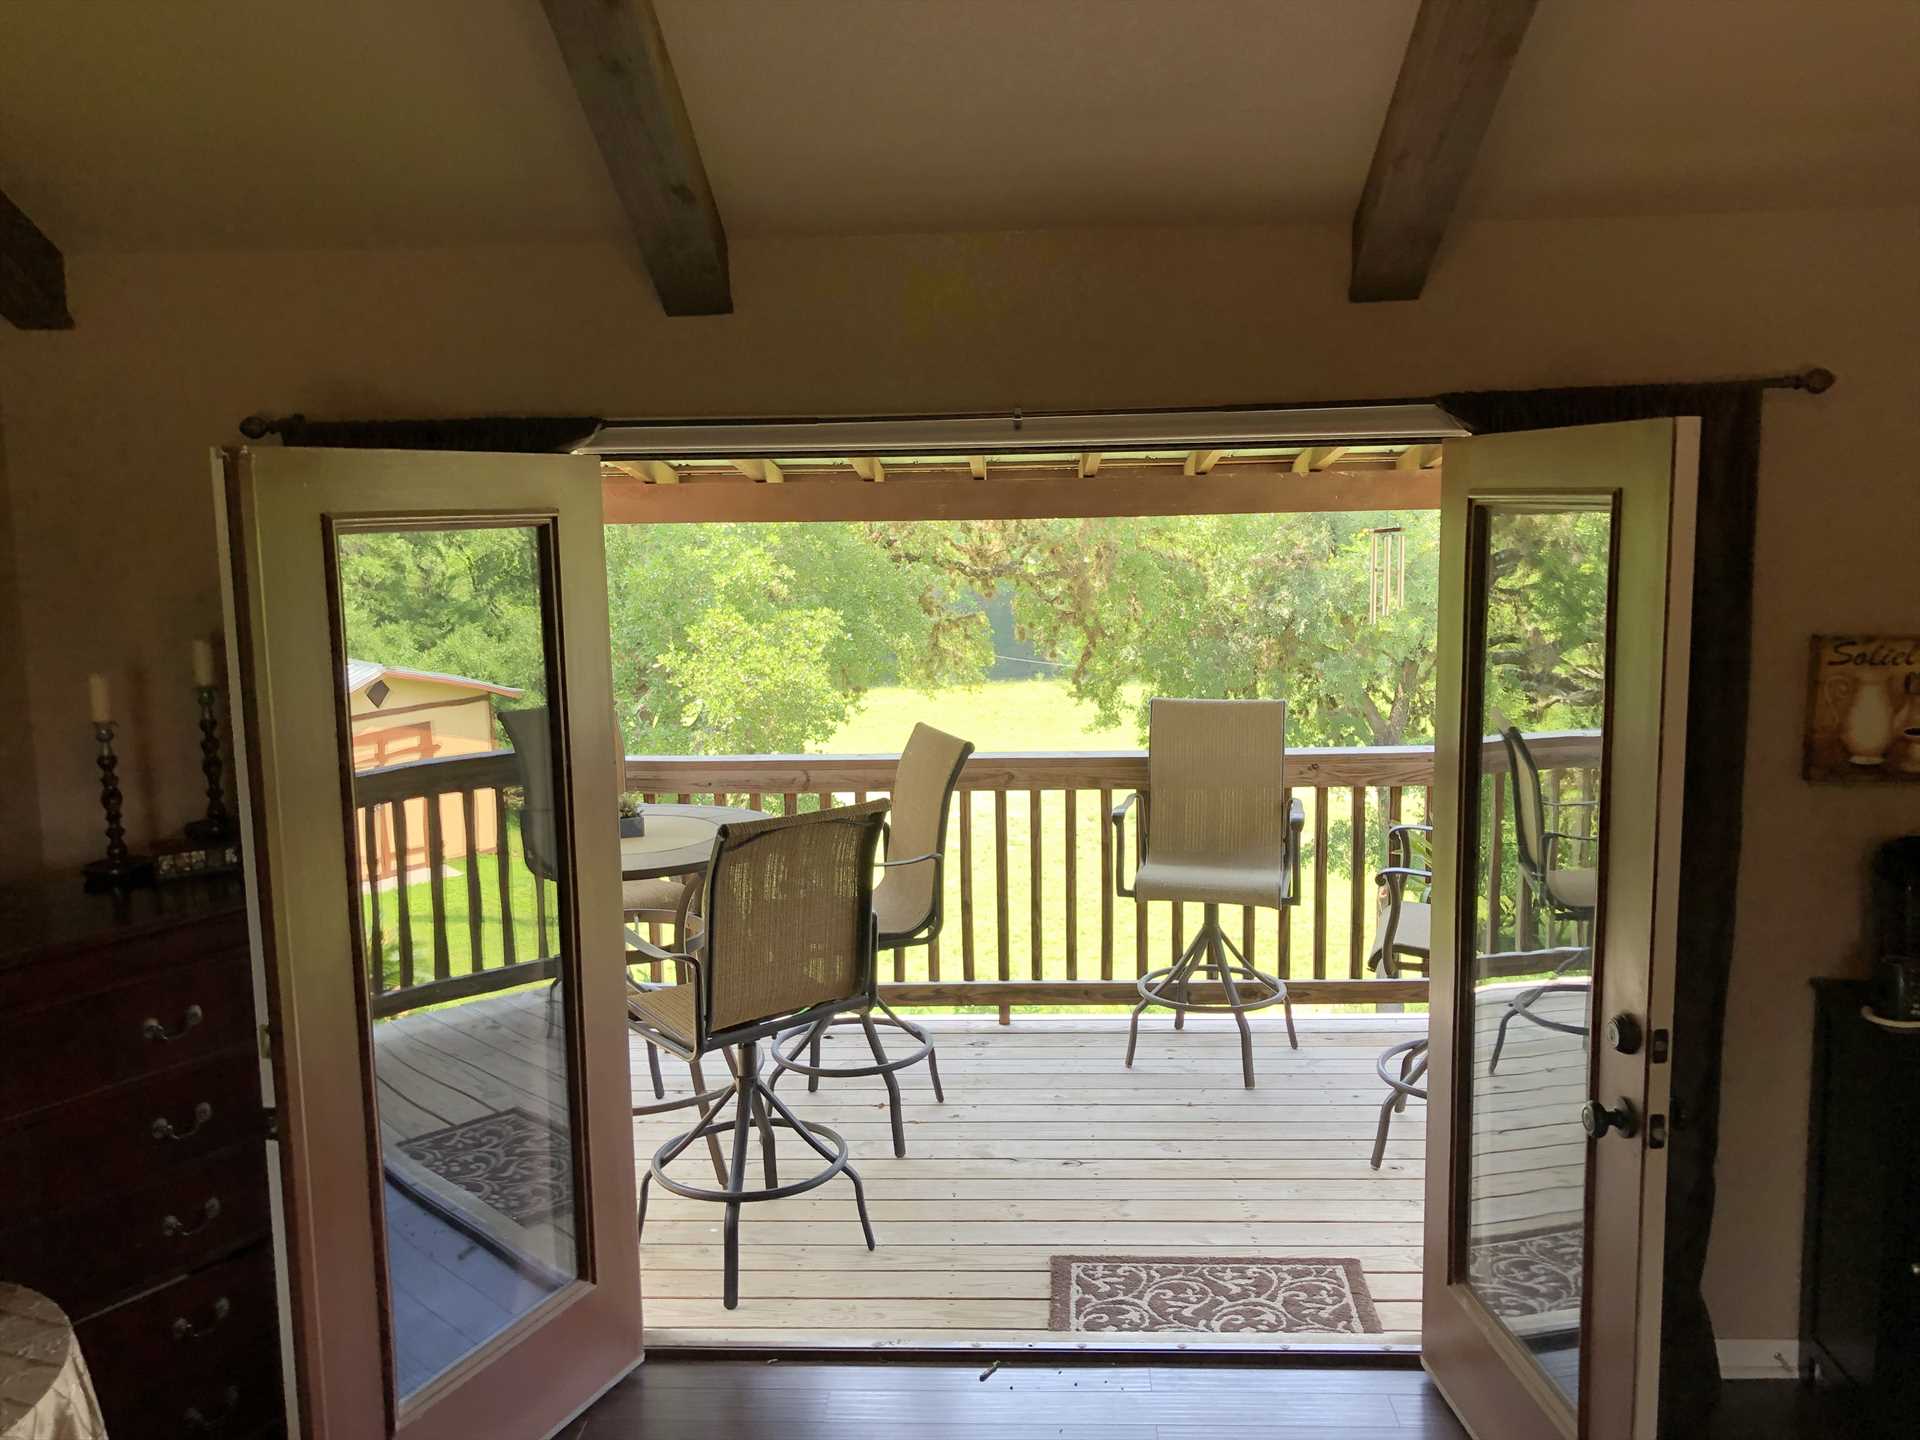                                                 Step out from the master suite onto your own private deck! Sip your morning coffee and greet the day with some amazing Hill Country views.